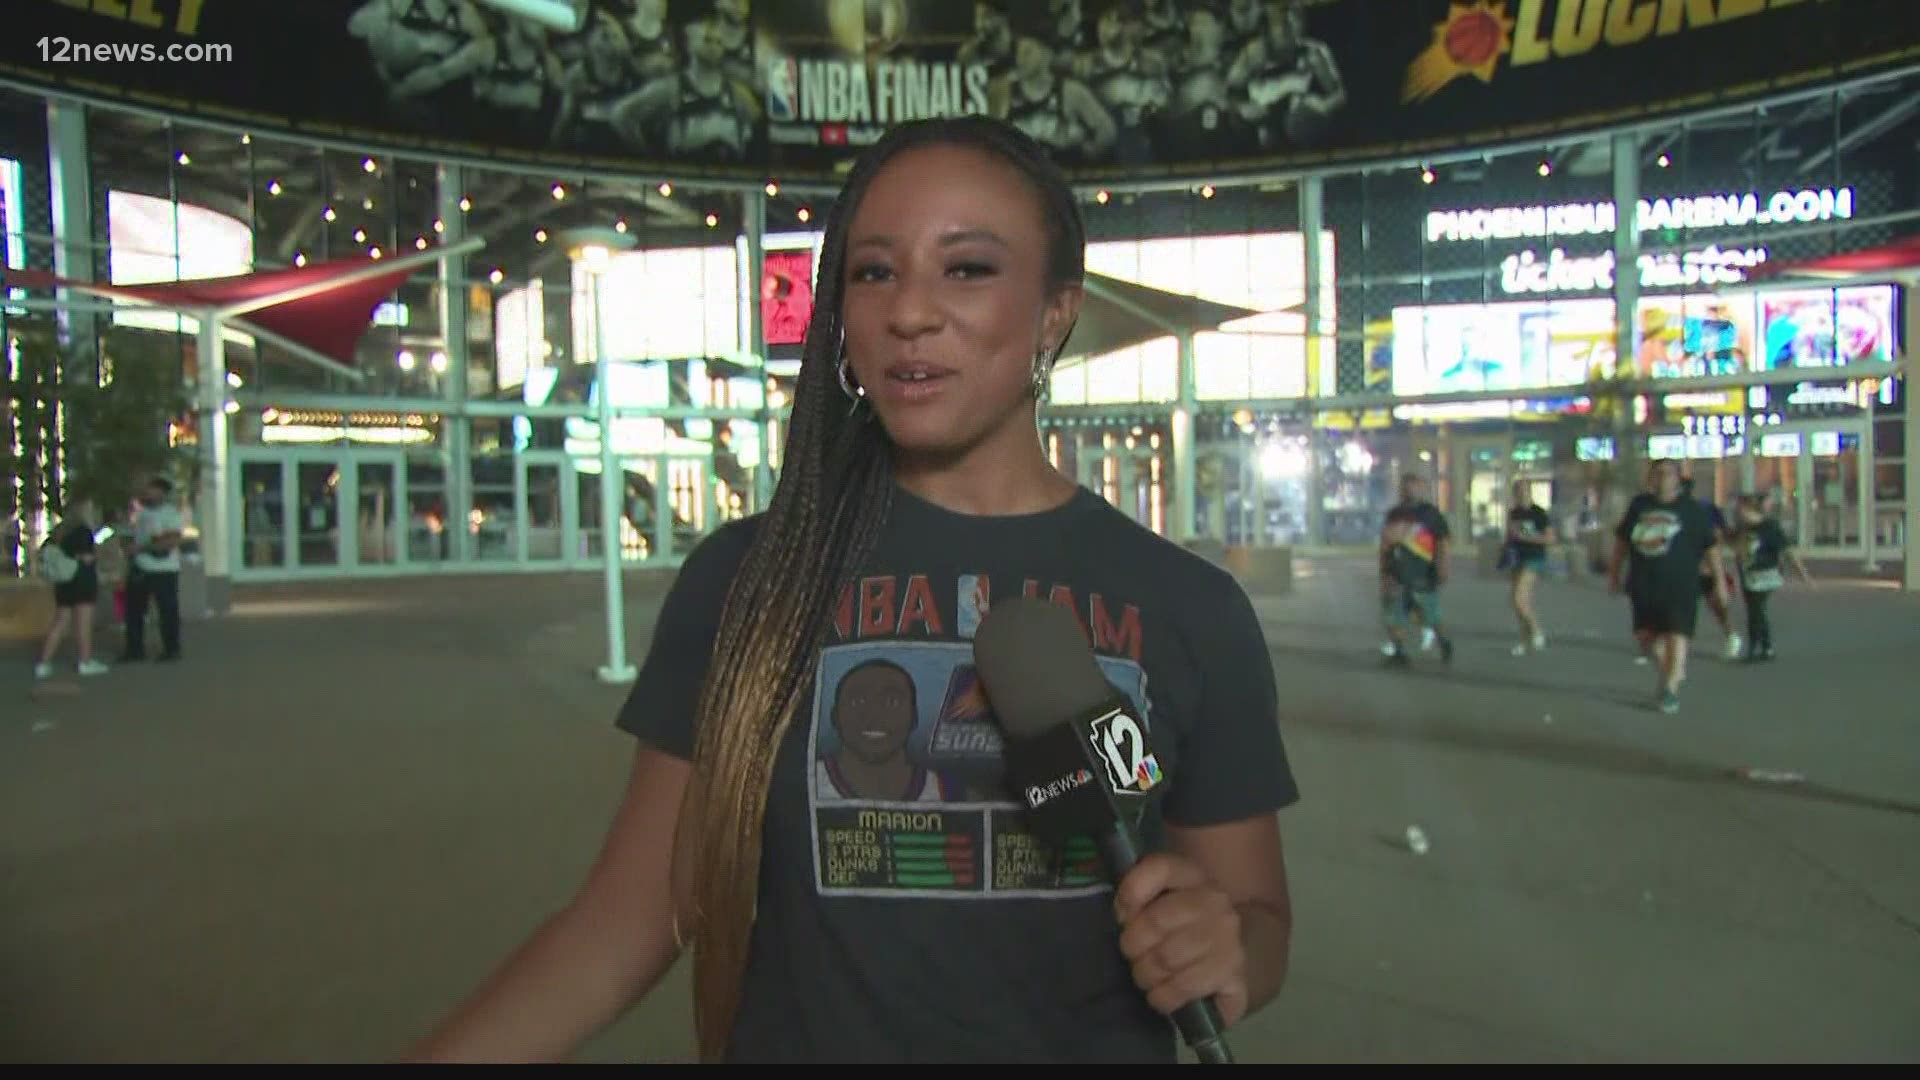 Phoenix Suns fans took to downtown and partied like it's 1993 after a huge Game 2 win in the NBA Finals. Lina Washington has the story.